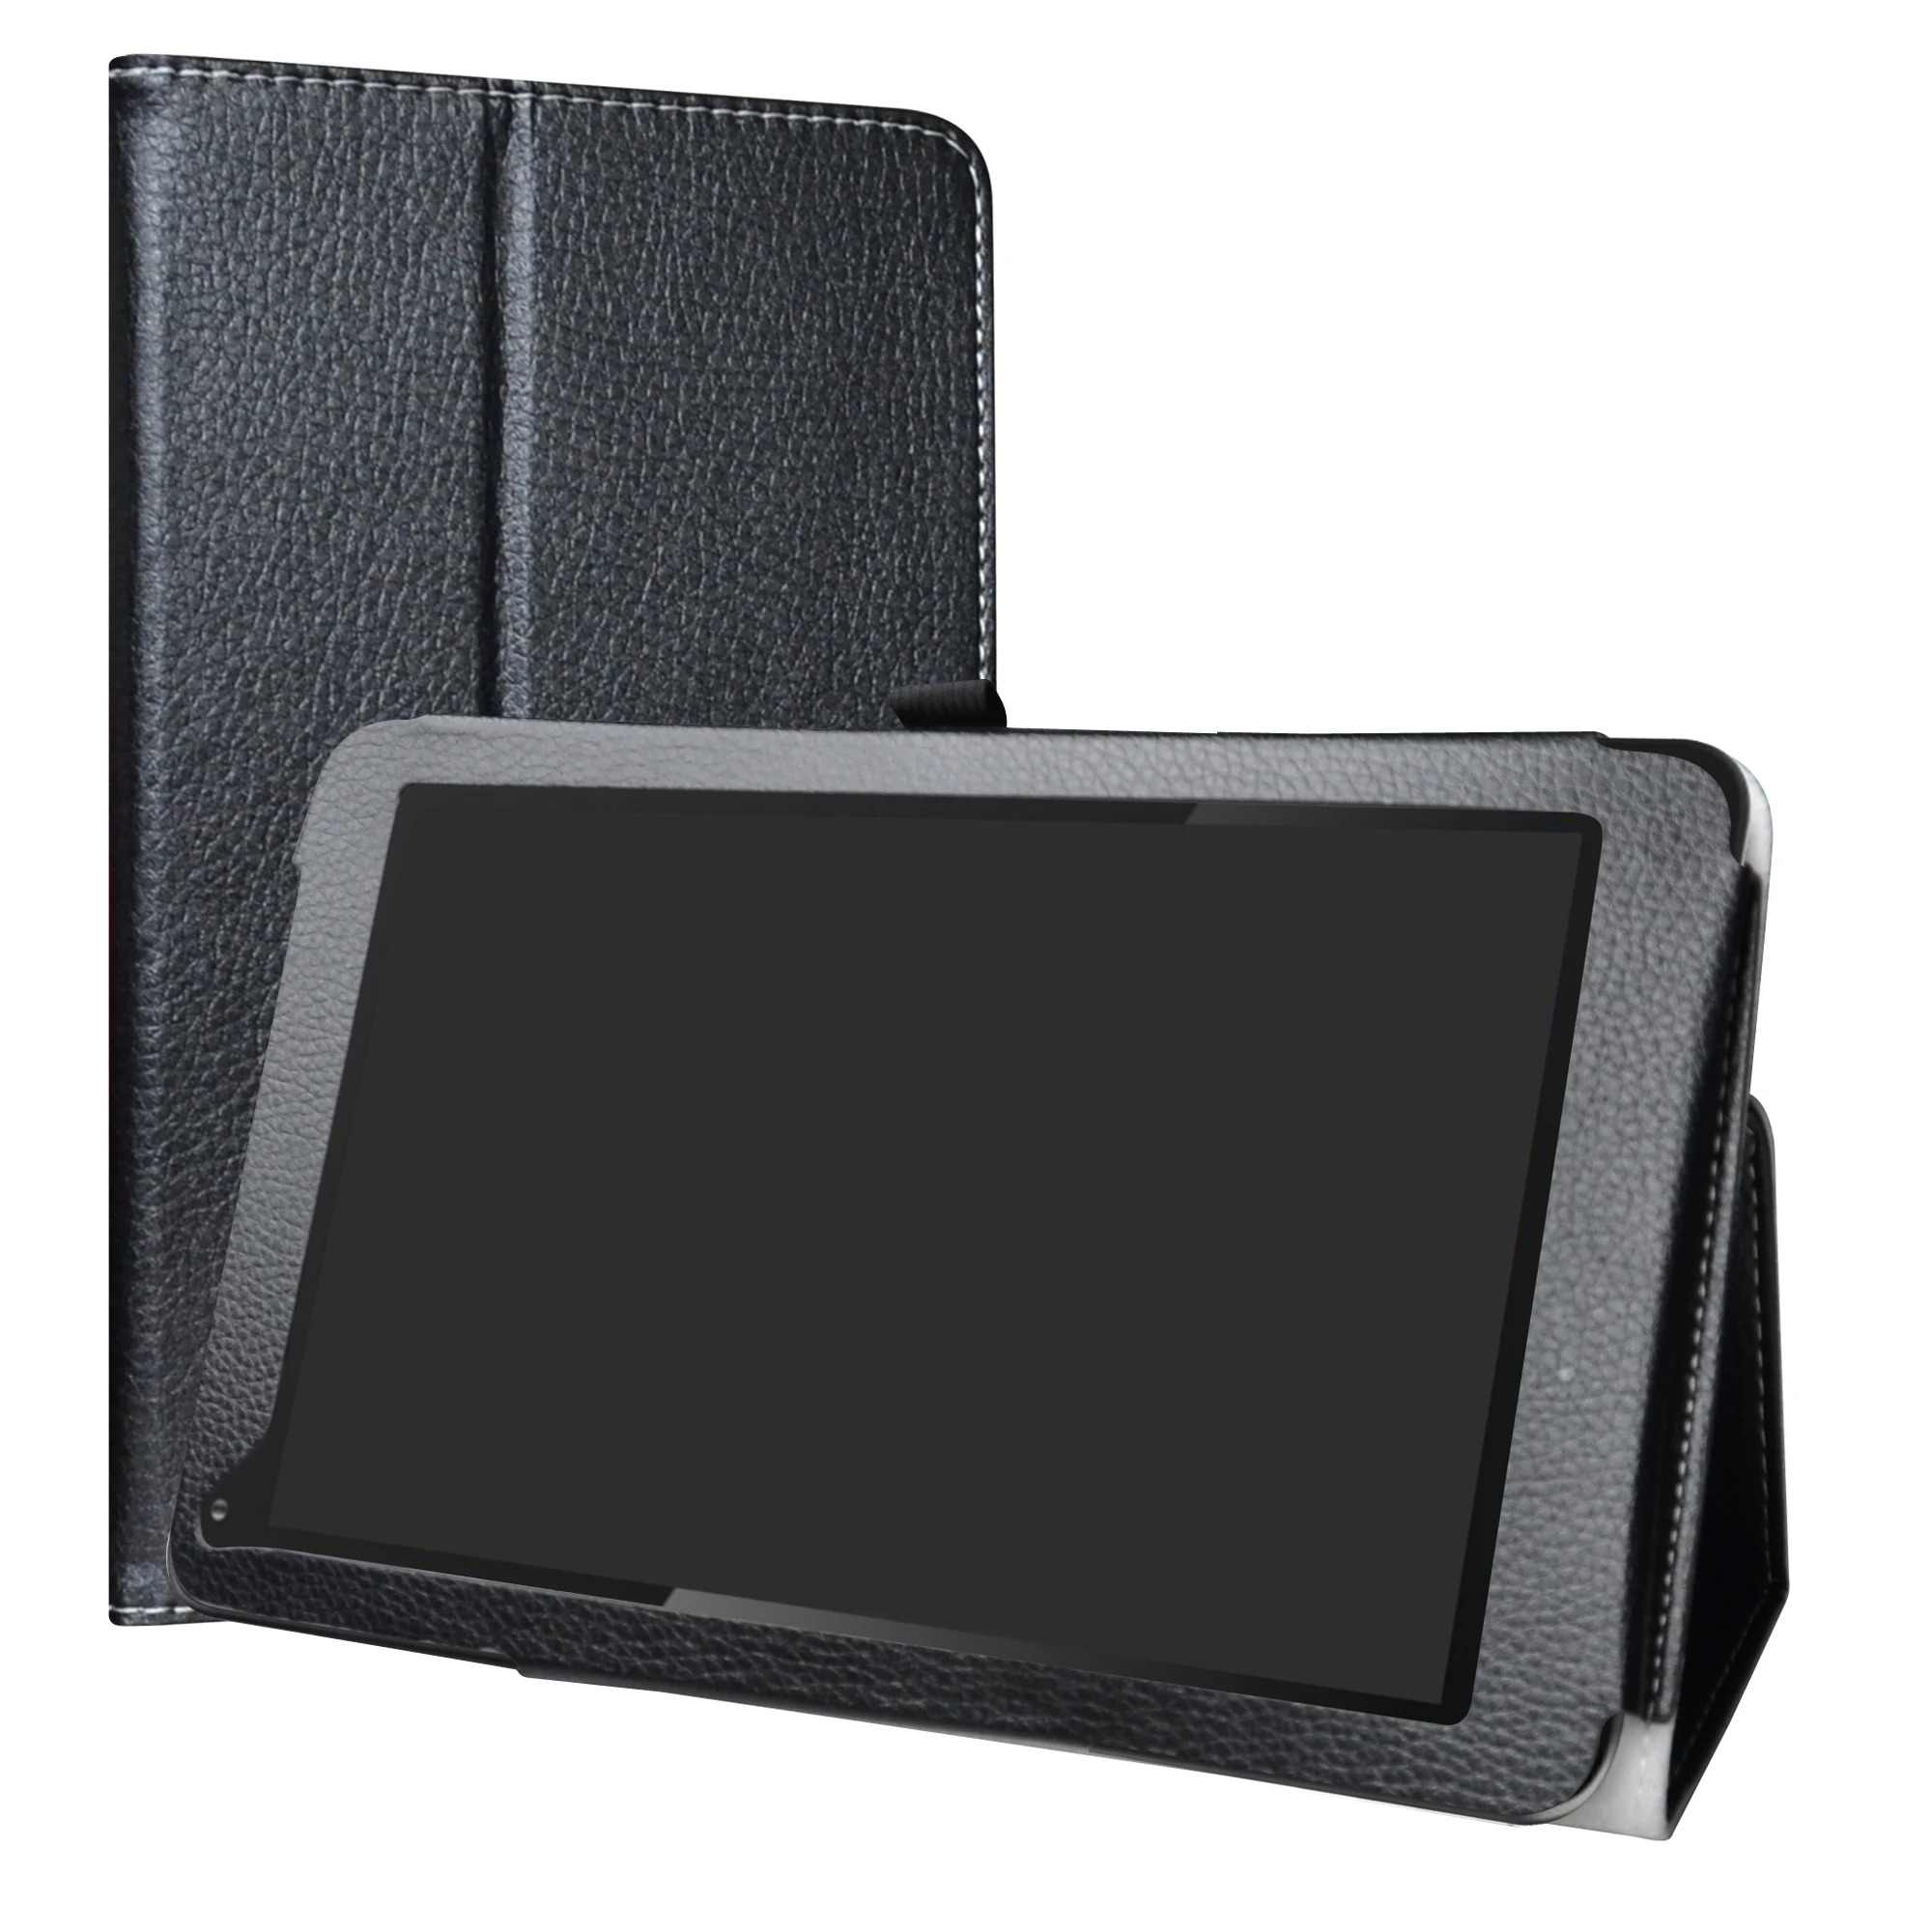 Case For Dragon Touch V10 10 Inch Tablet  Folding Stand PU Leather Cover with Magnetic Closure